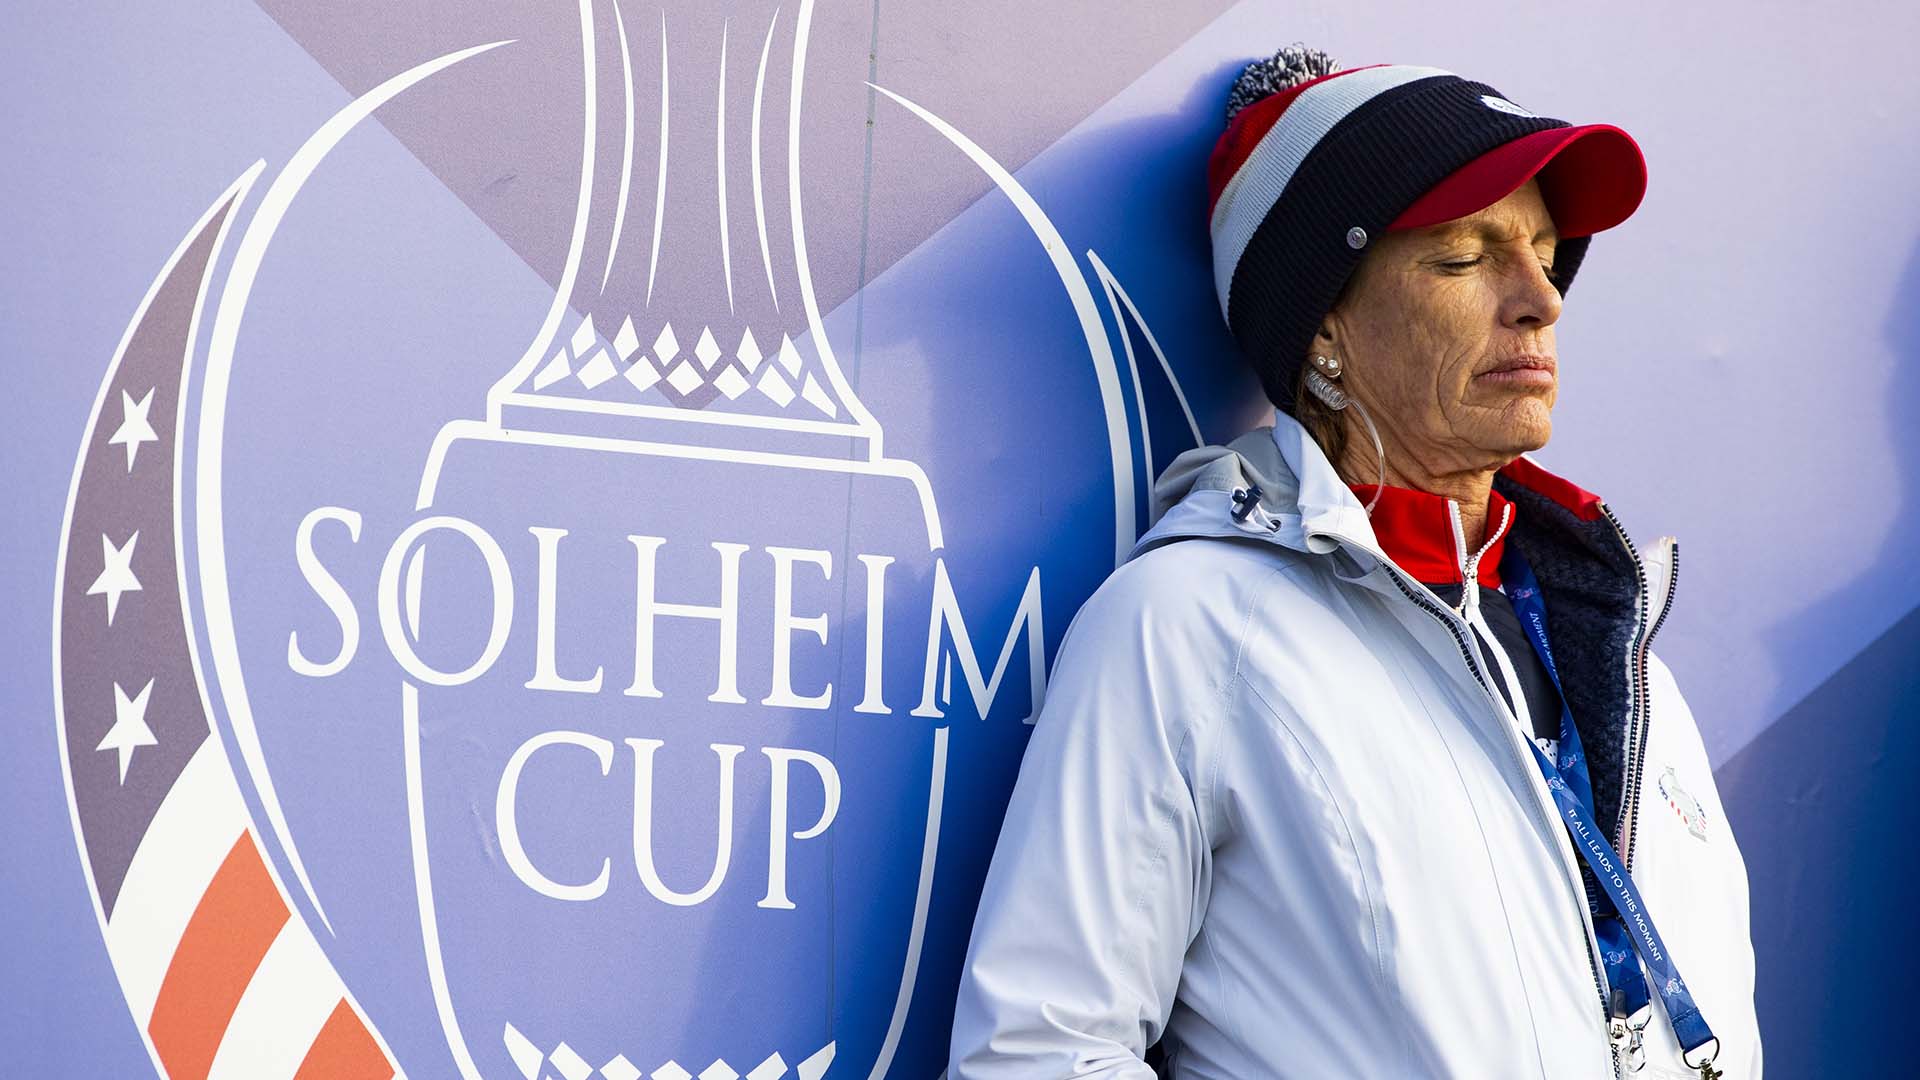 Inkster's Done, U.S. Solheim Team Lacked Player Leadership